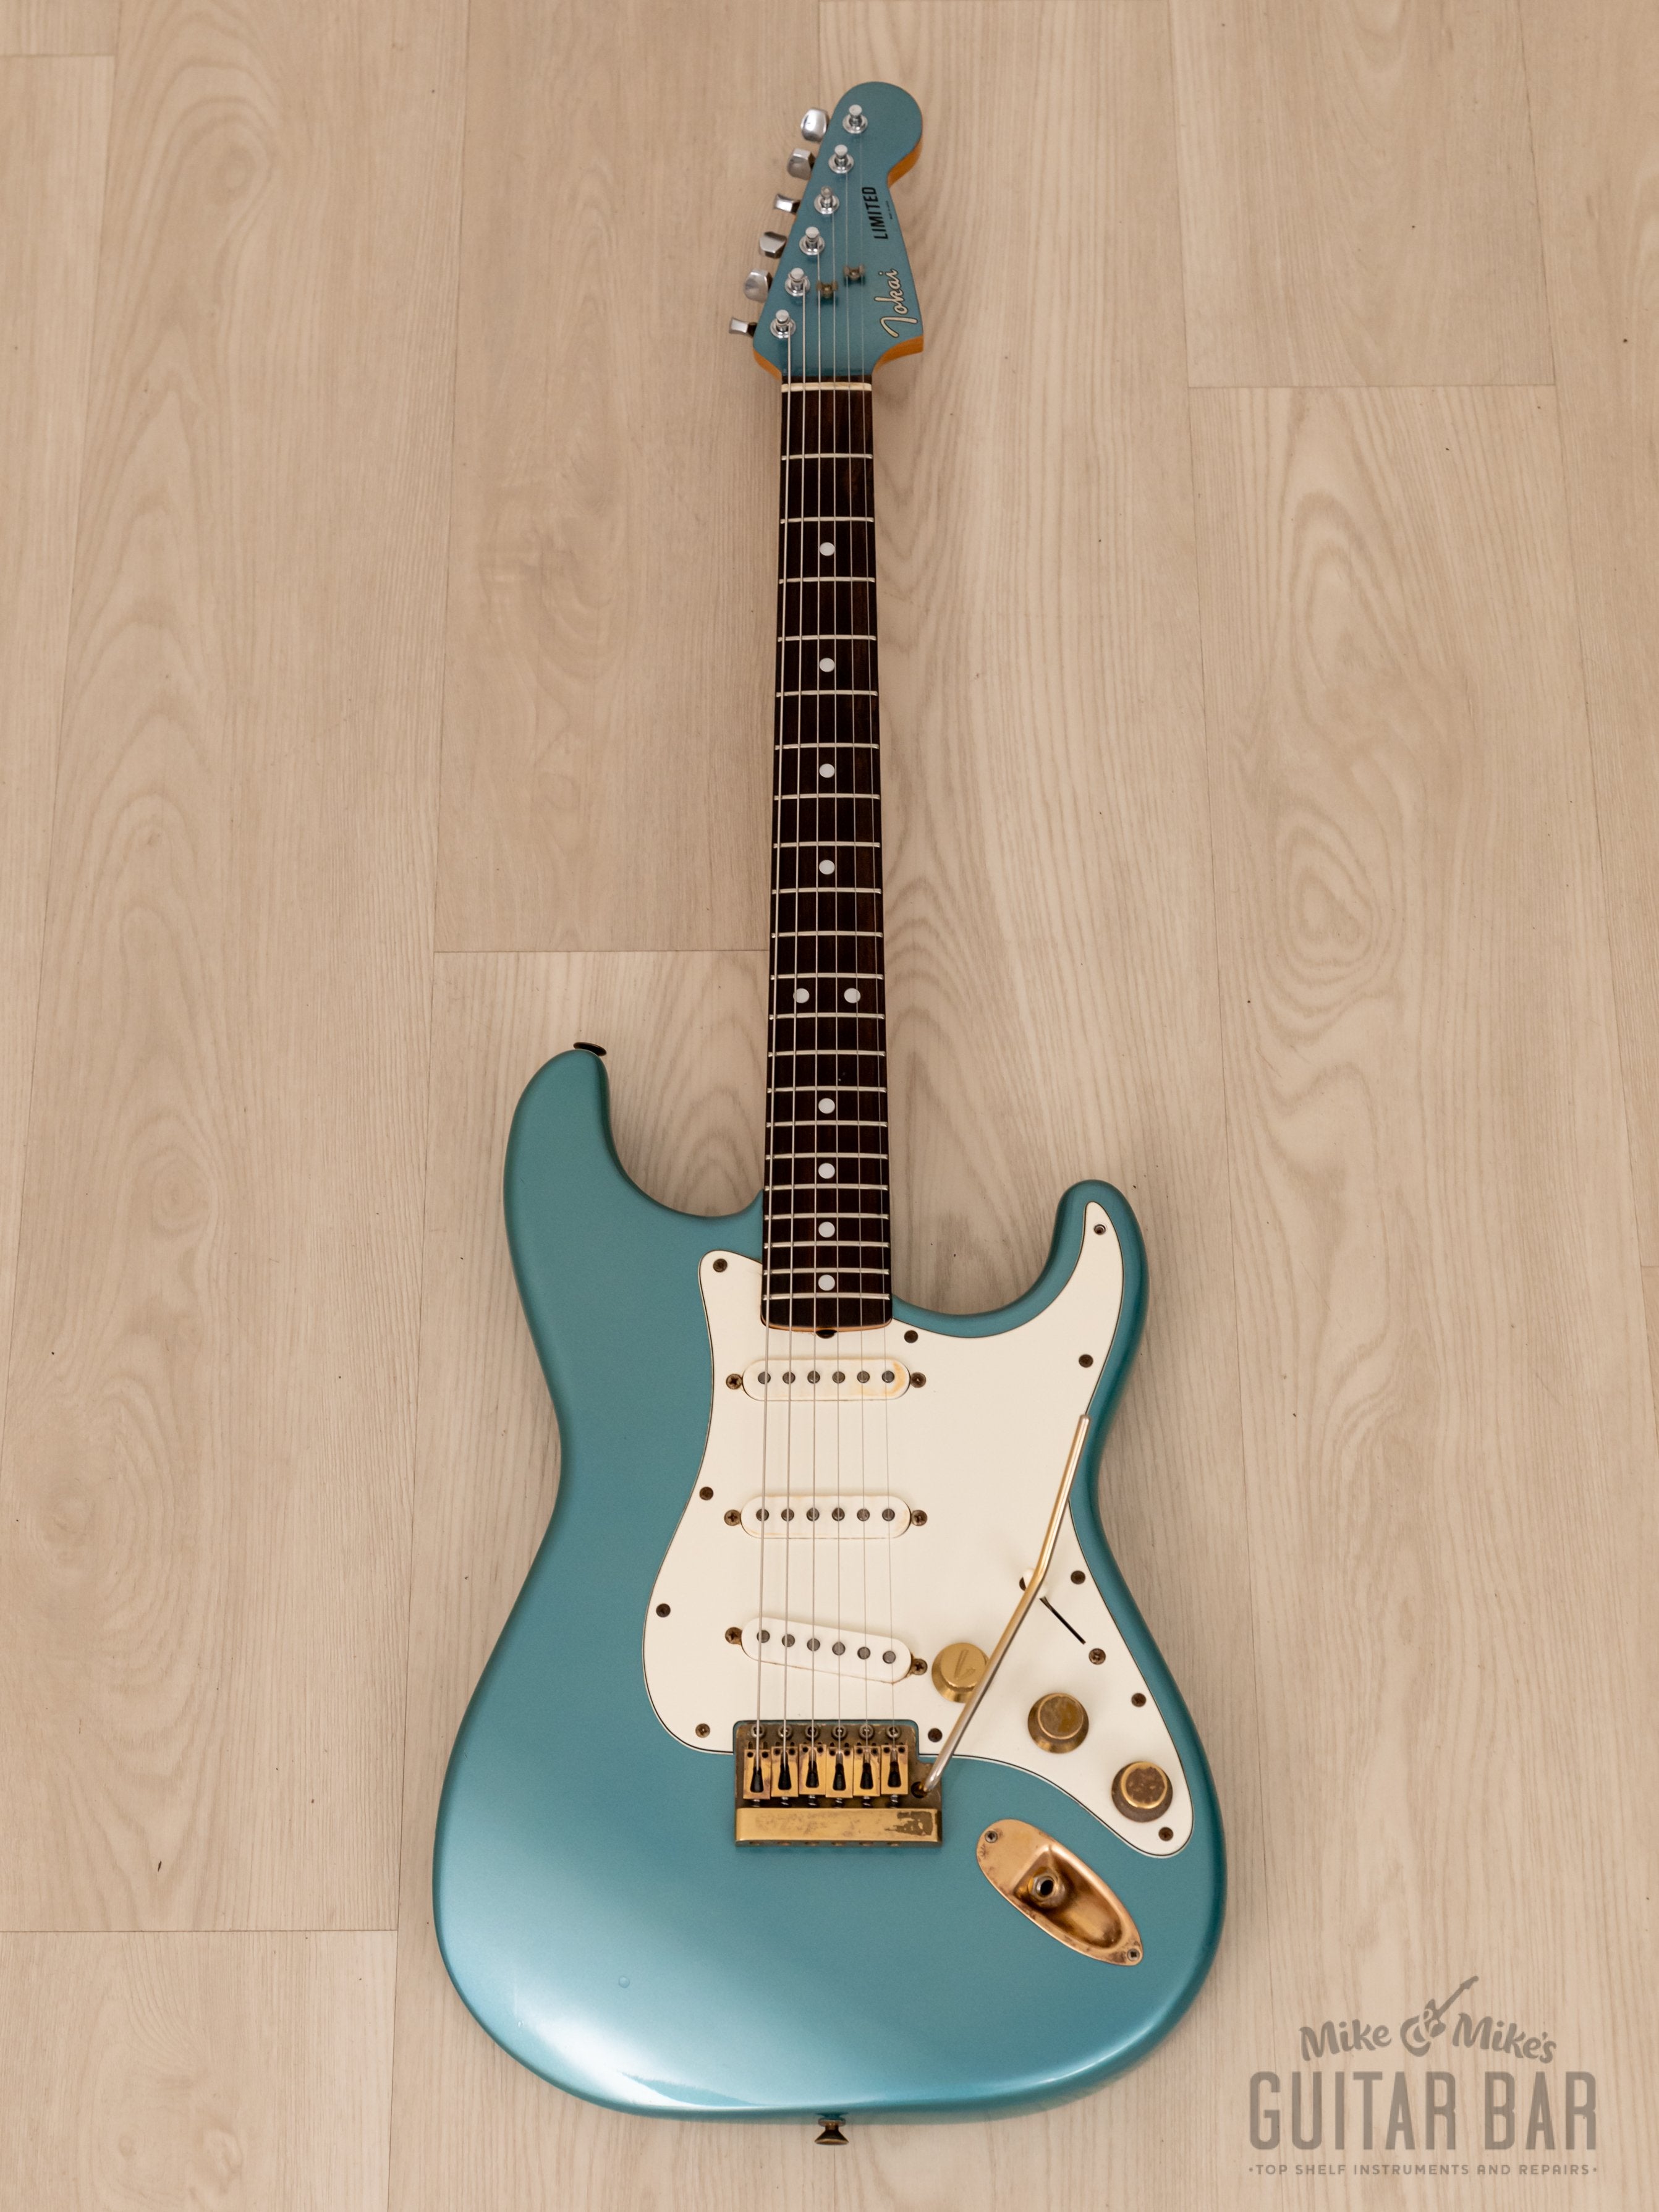 1981 Tokai SS70 Limited Edition Vintage S-Style Superstrat Guitar Light  Blue, Japan